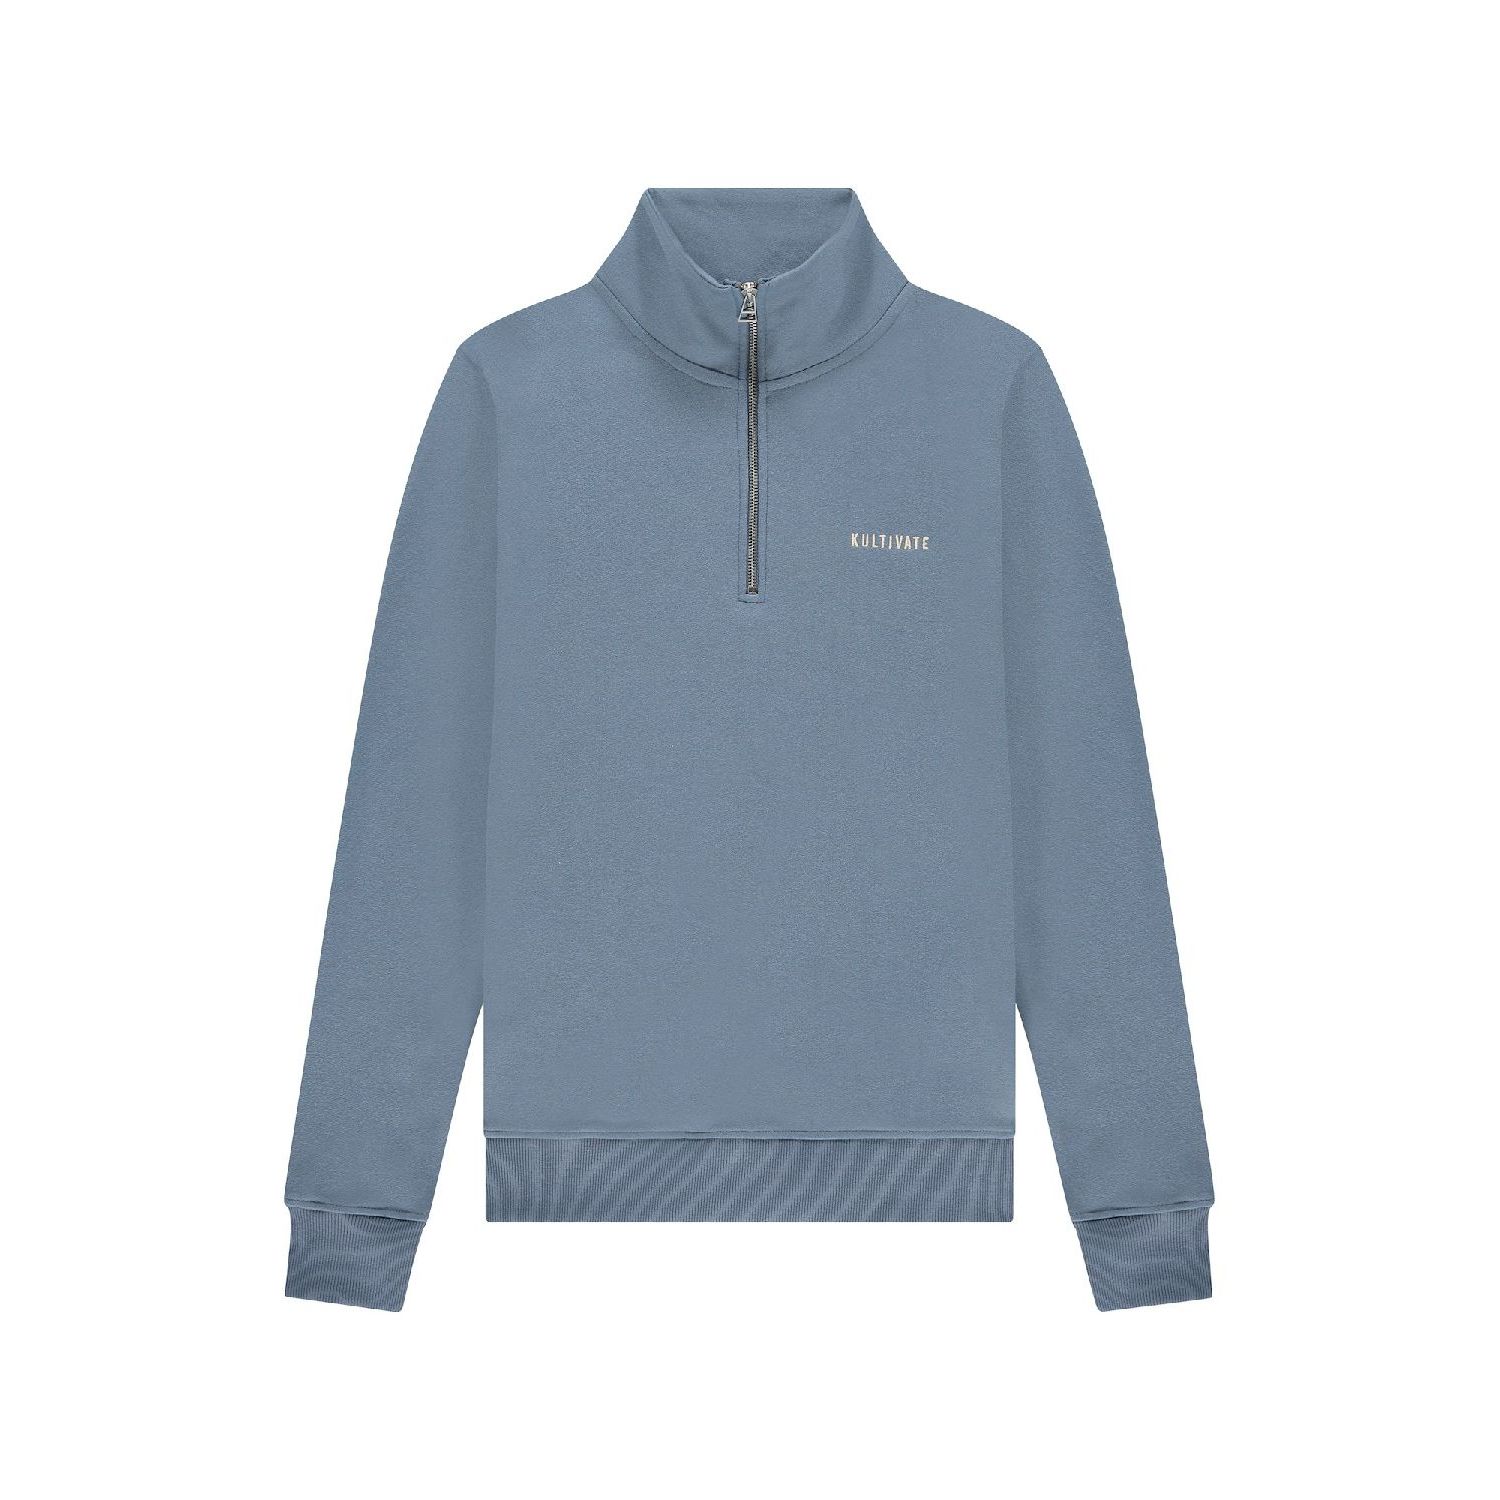 Kultivate sw outro sweater china blue